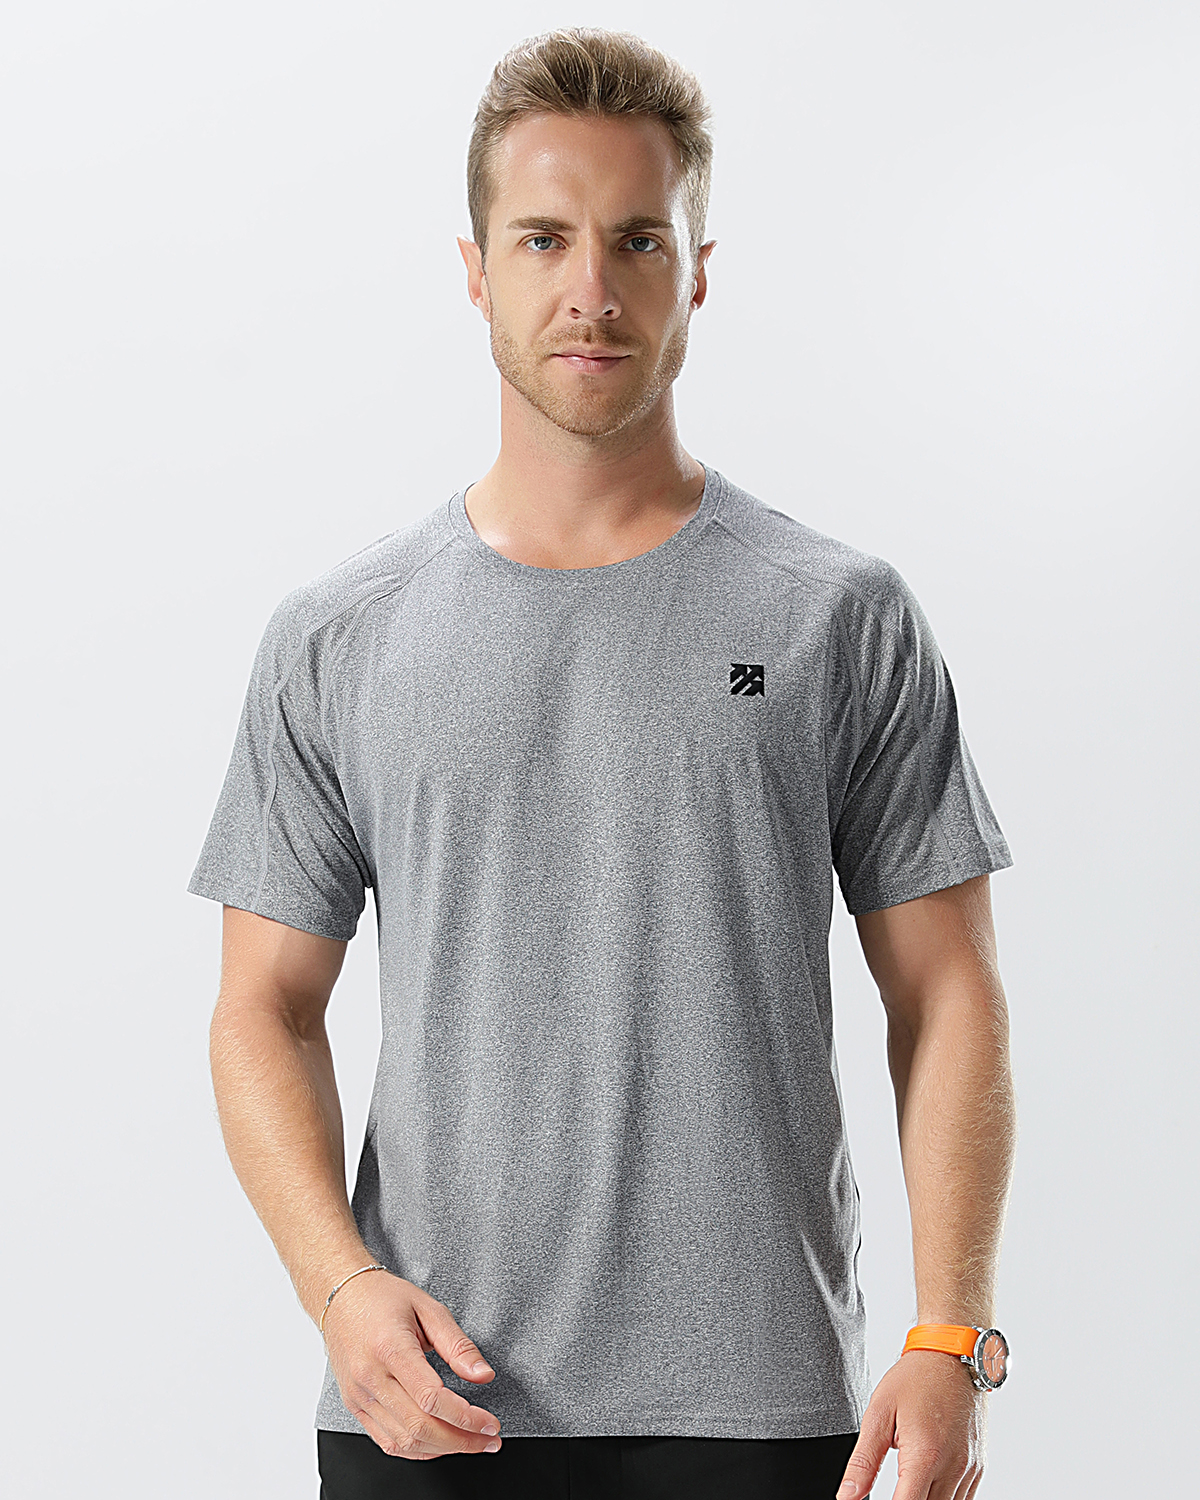  Men's Breathable Cationic Sports T-Shirt